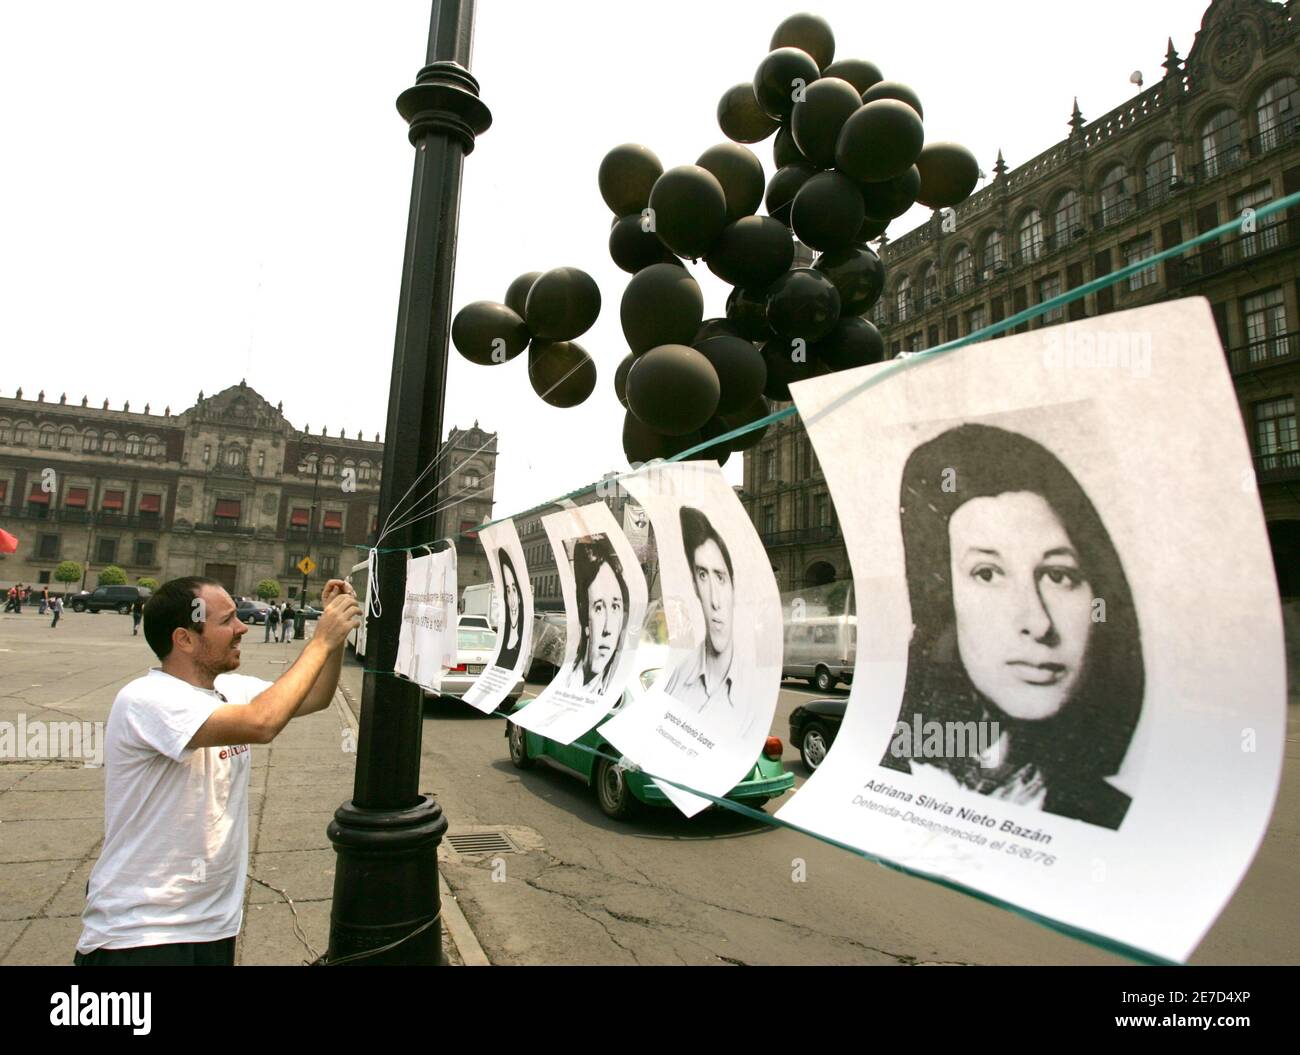 An Argentine man, who lives in Mexico, hangs photos of people who disappeared during the 'Dirty War' in Argentina during an event commemorating the 30th anniversary of Argentina's 1976 military coup against